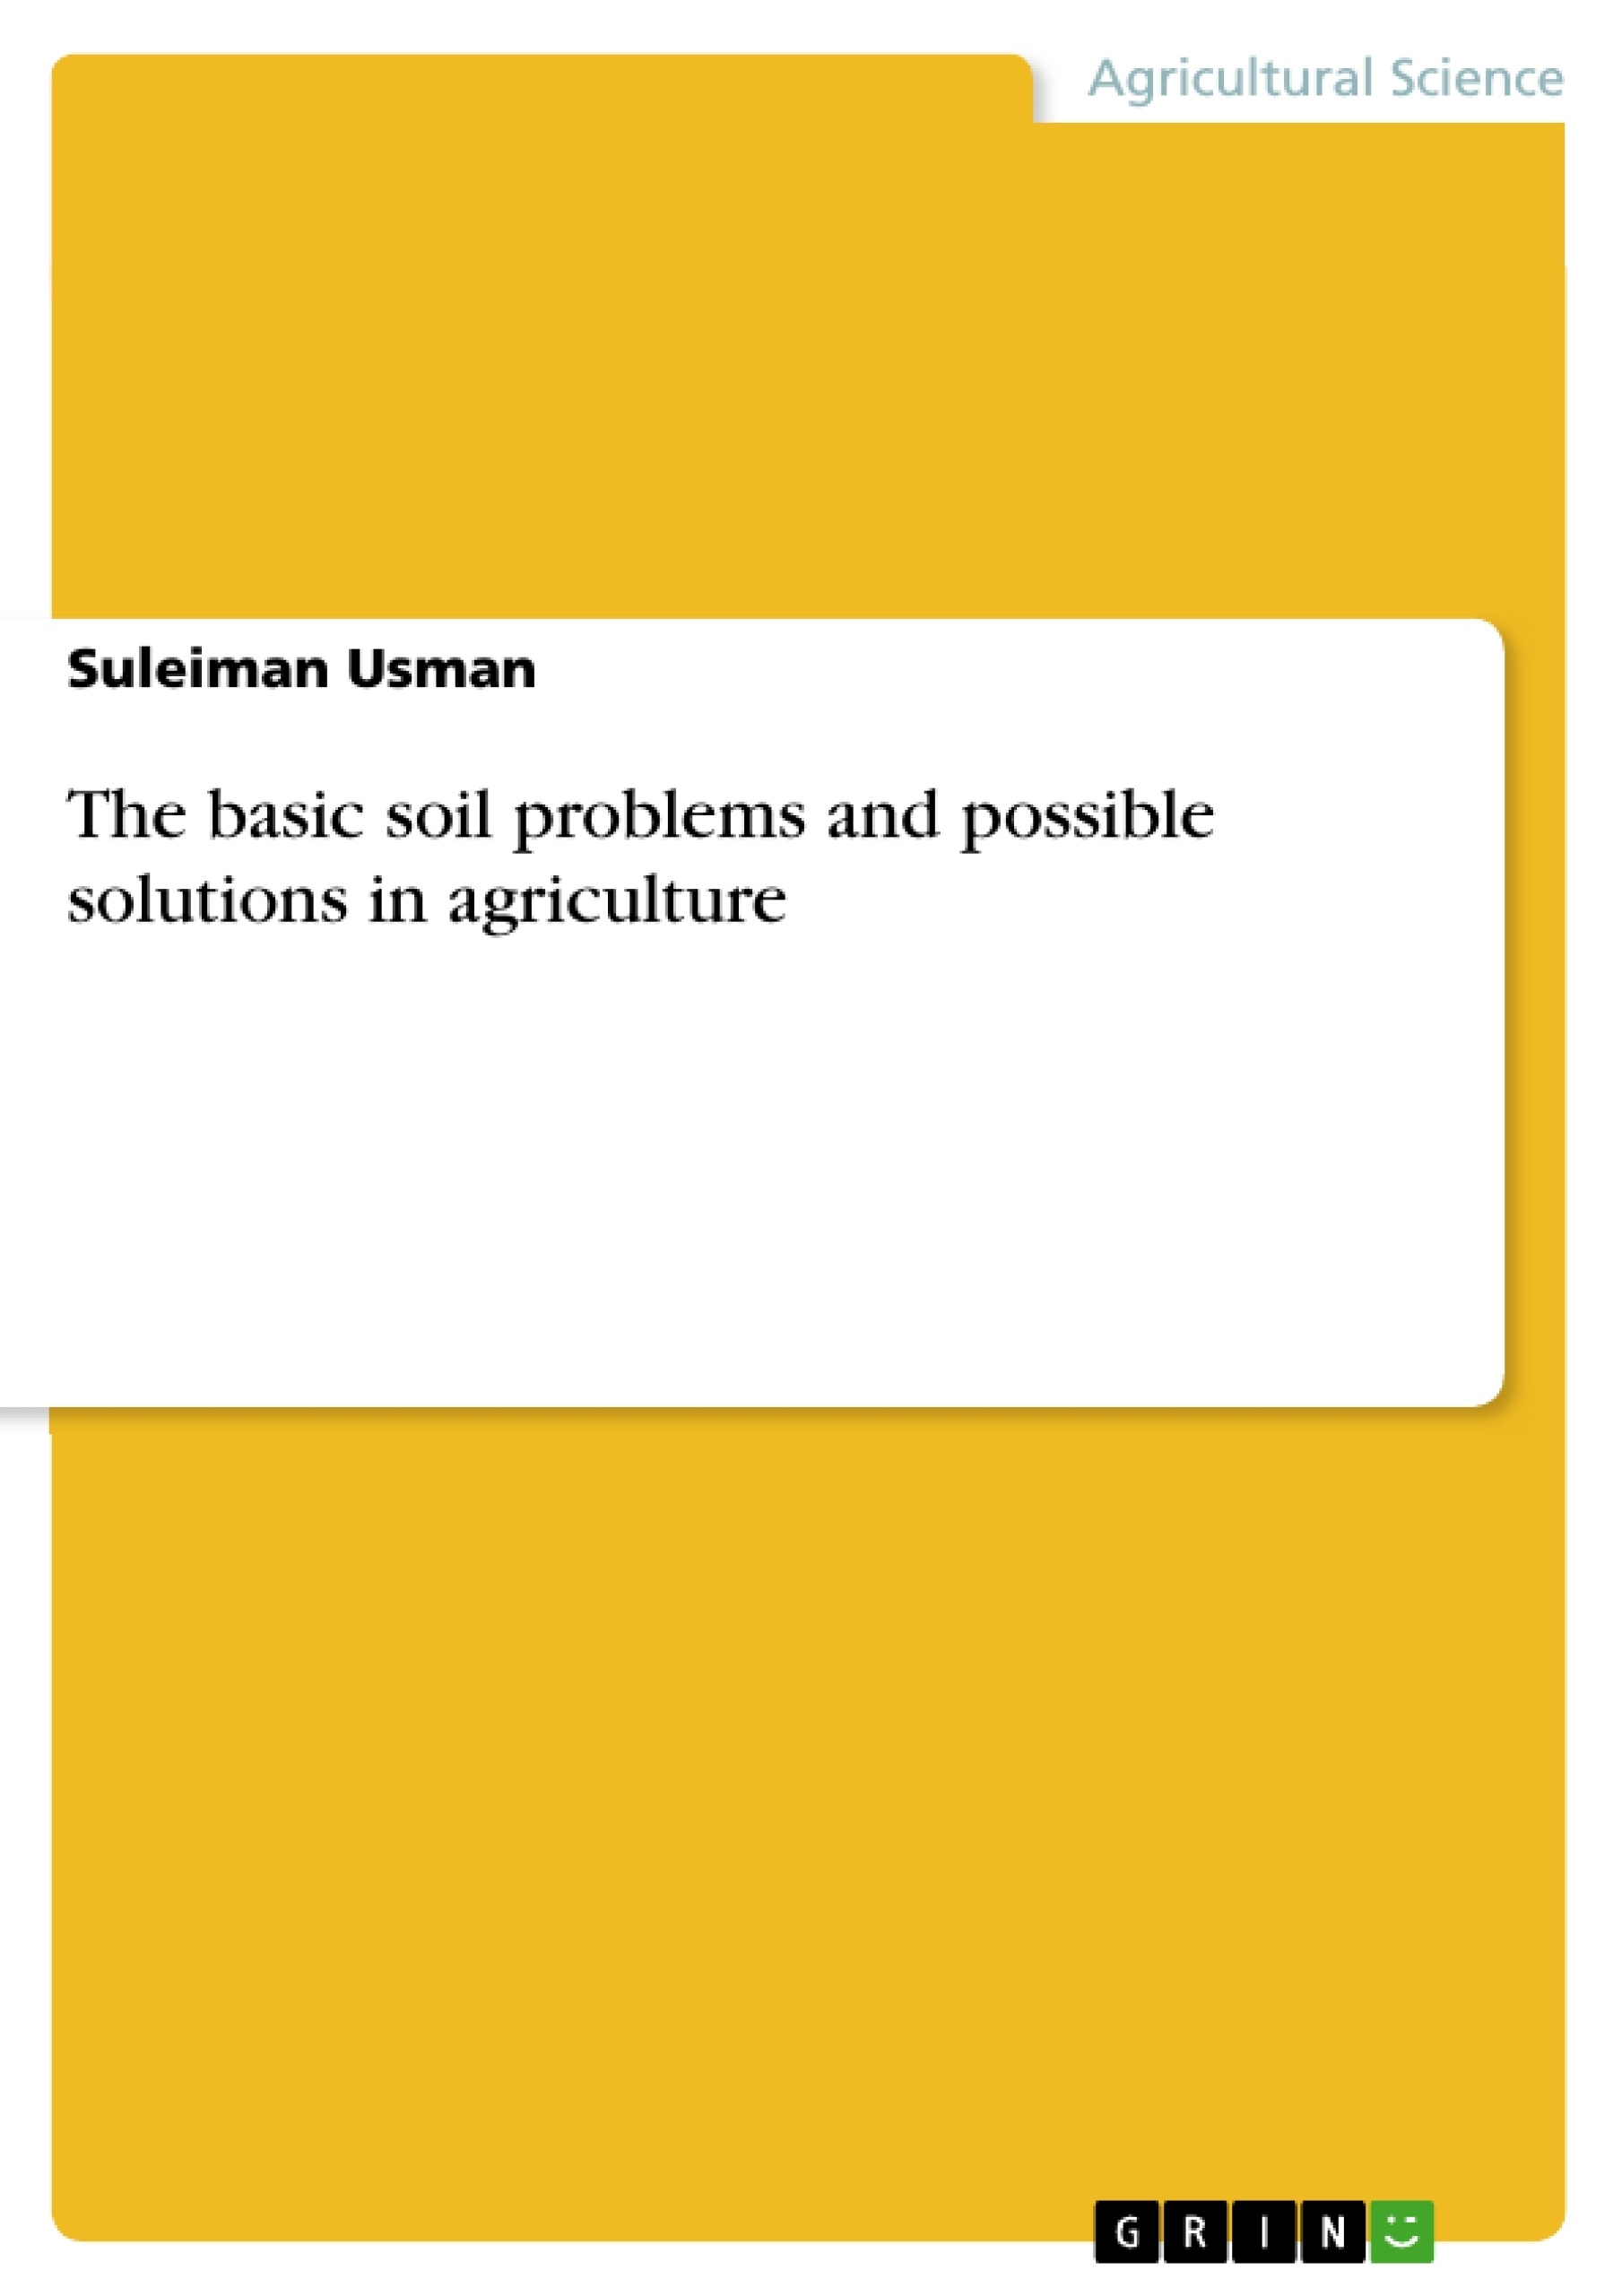 Titre: The basic soil problems and possible solutions in agriculture